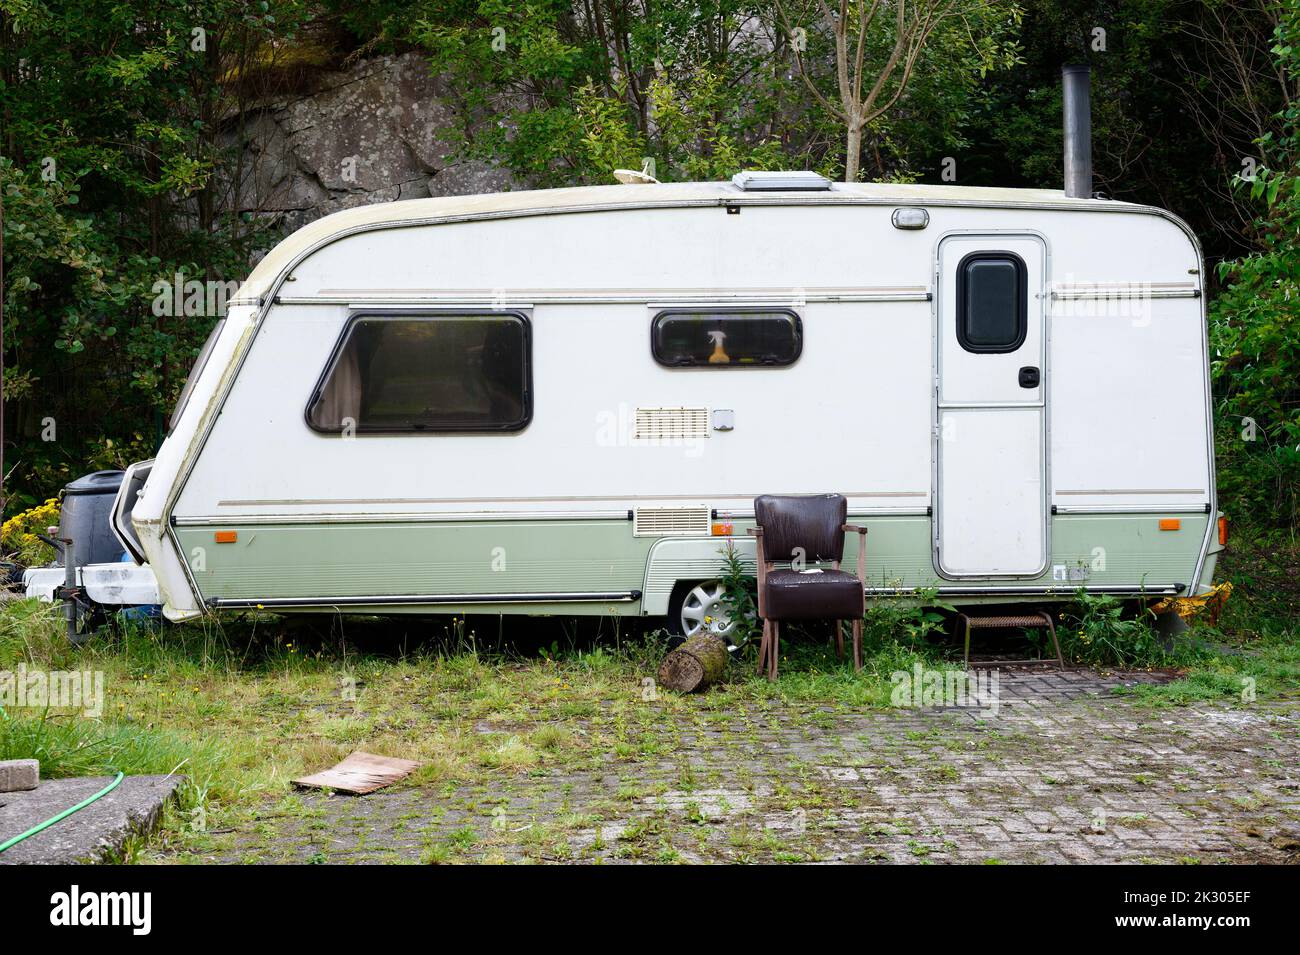 Caravan abandoned and dumped in park waiting to be removed Stock Photo